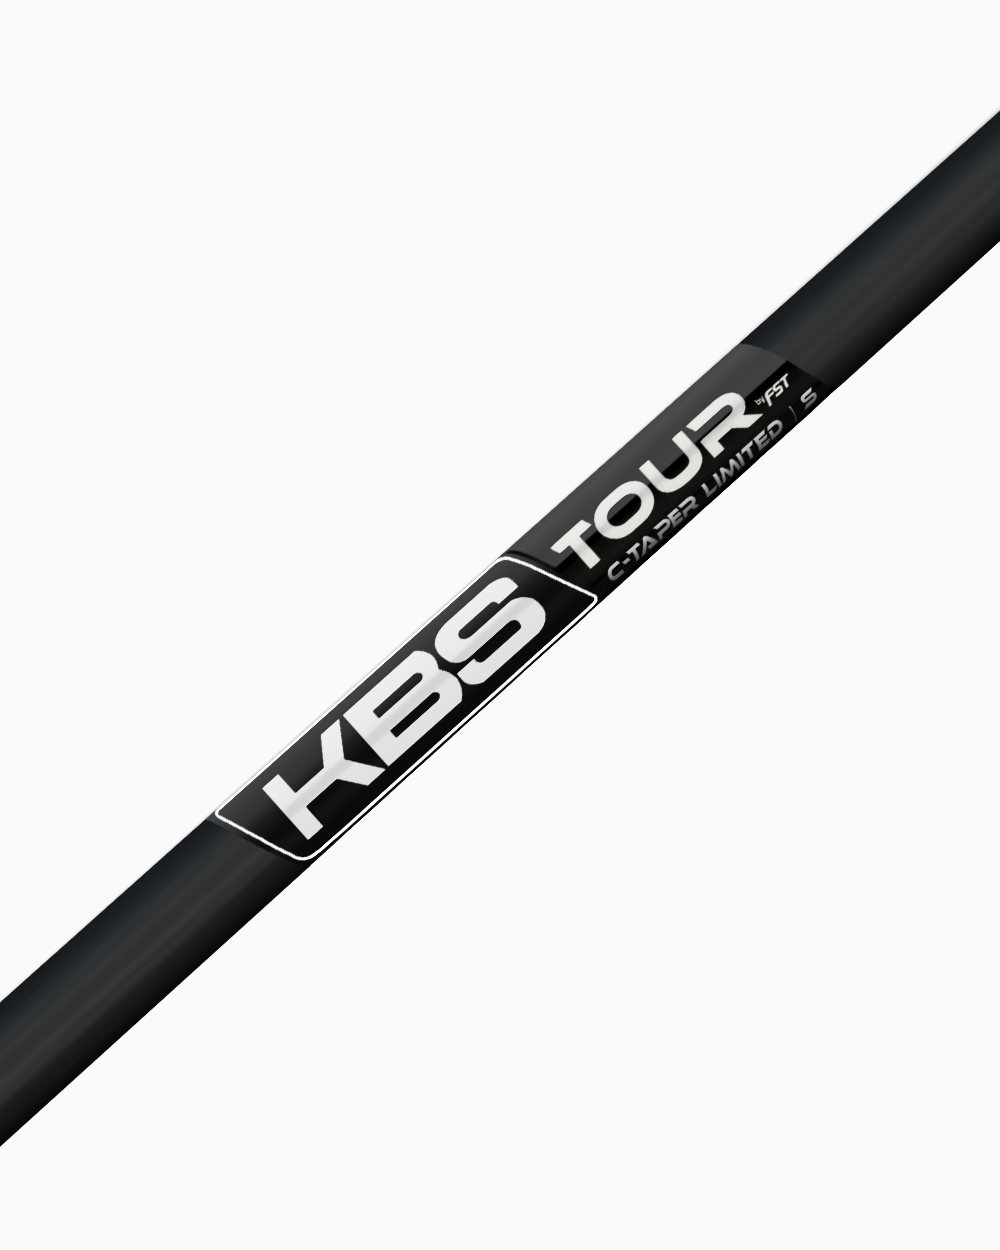 C-TAPER Black Limited Edition - KBS